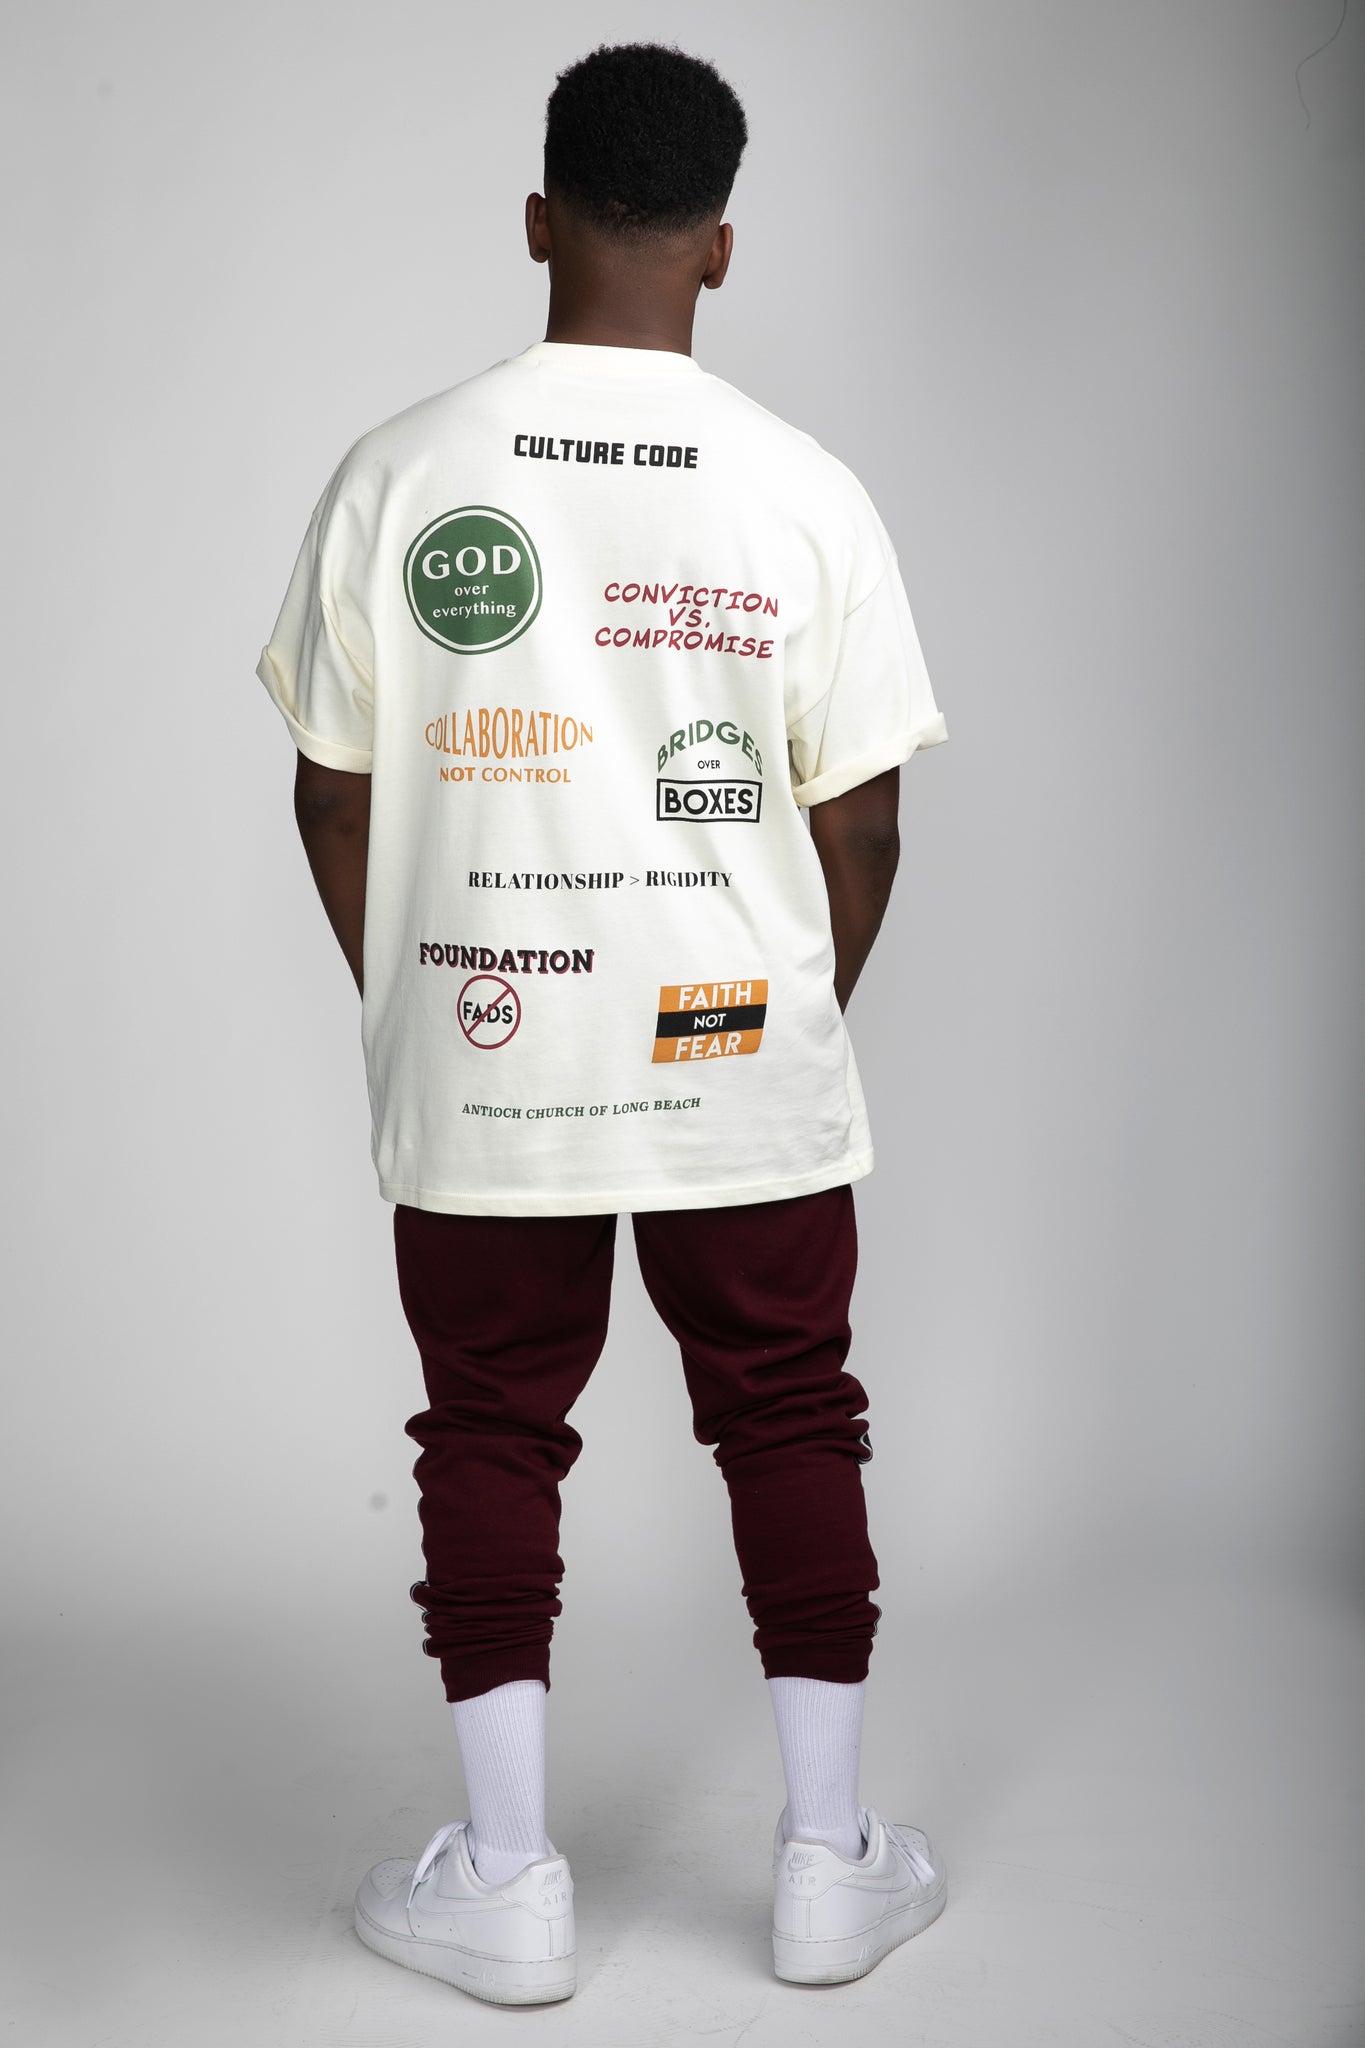 The Culture Tee